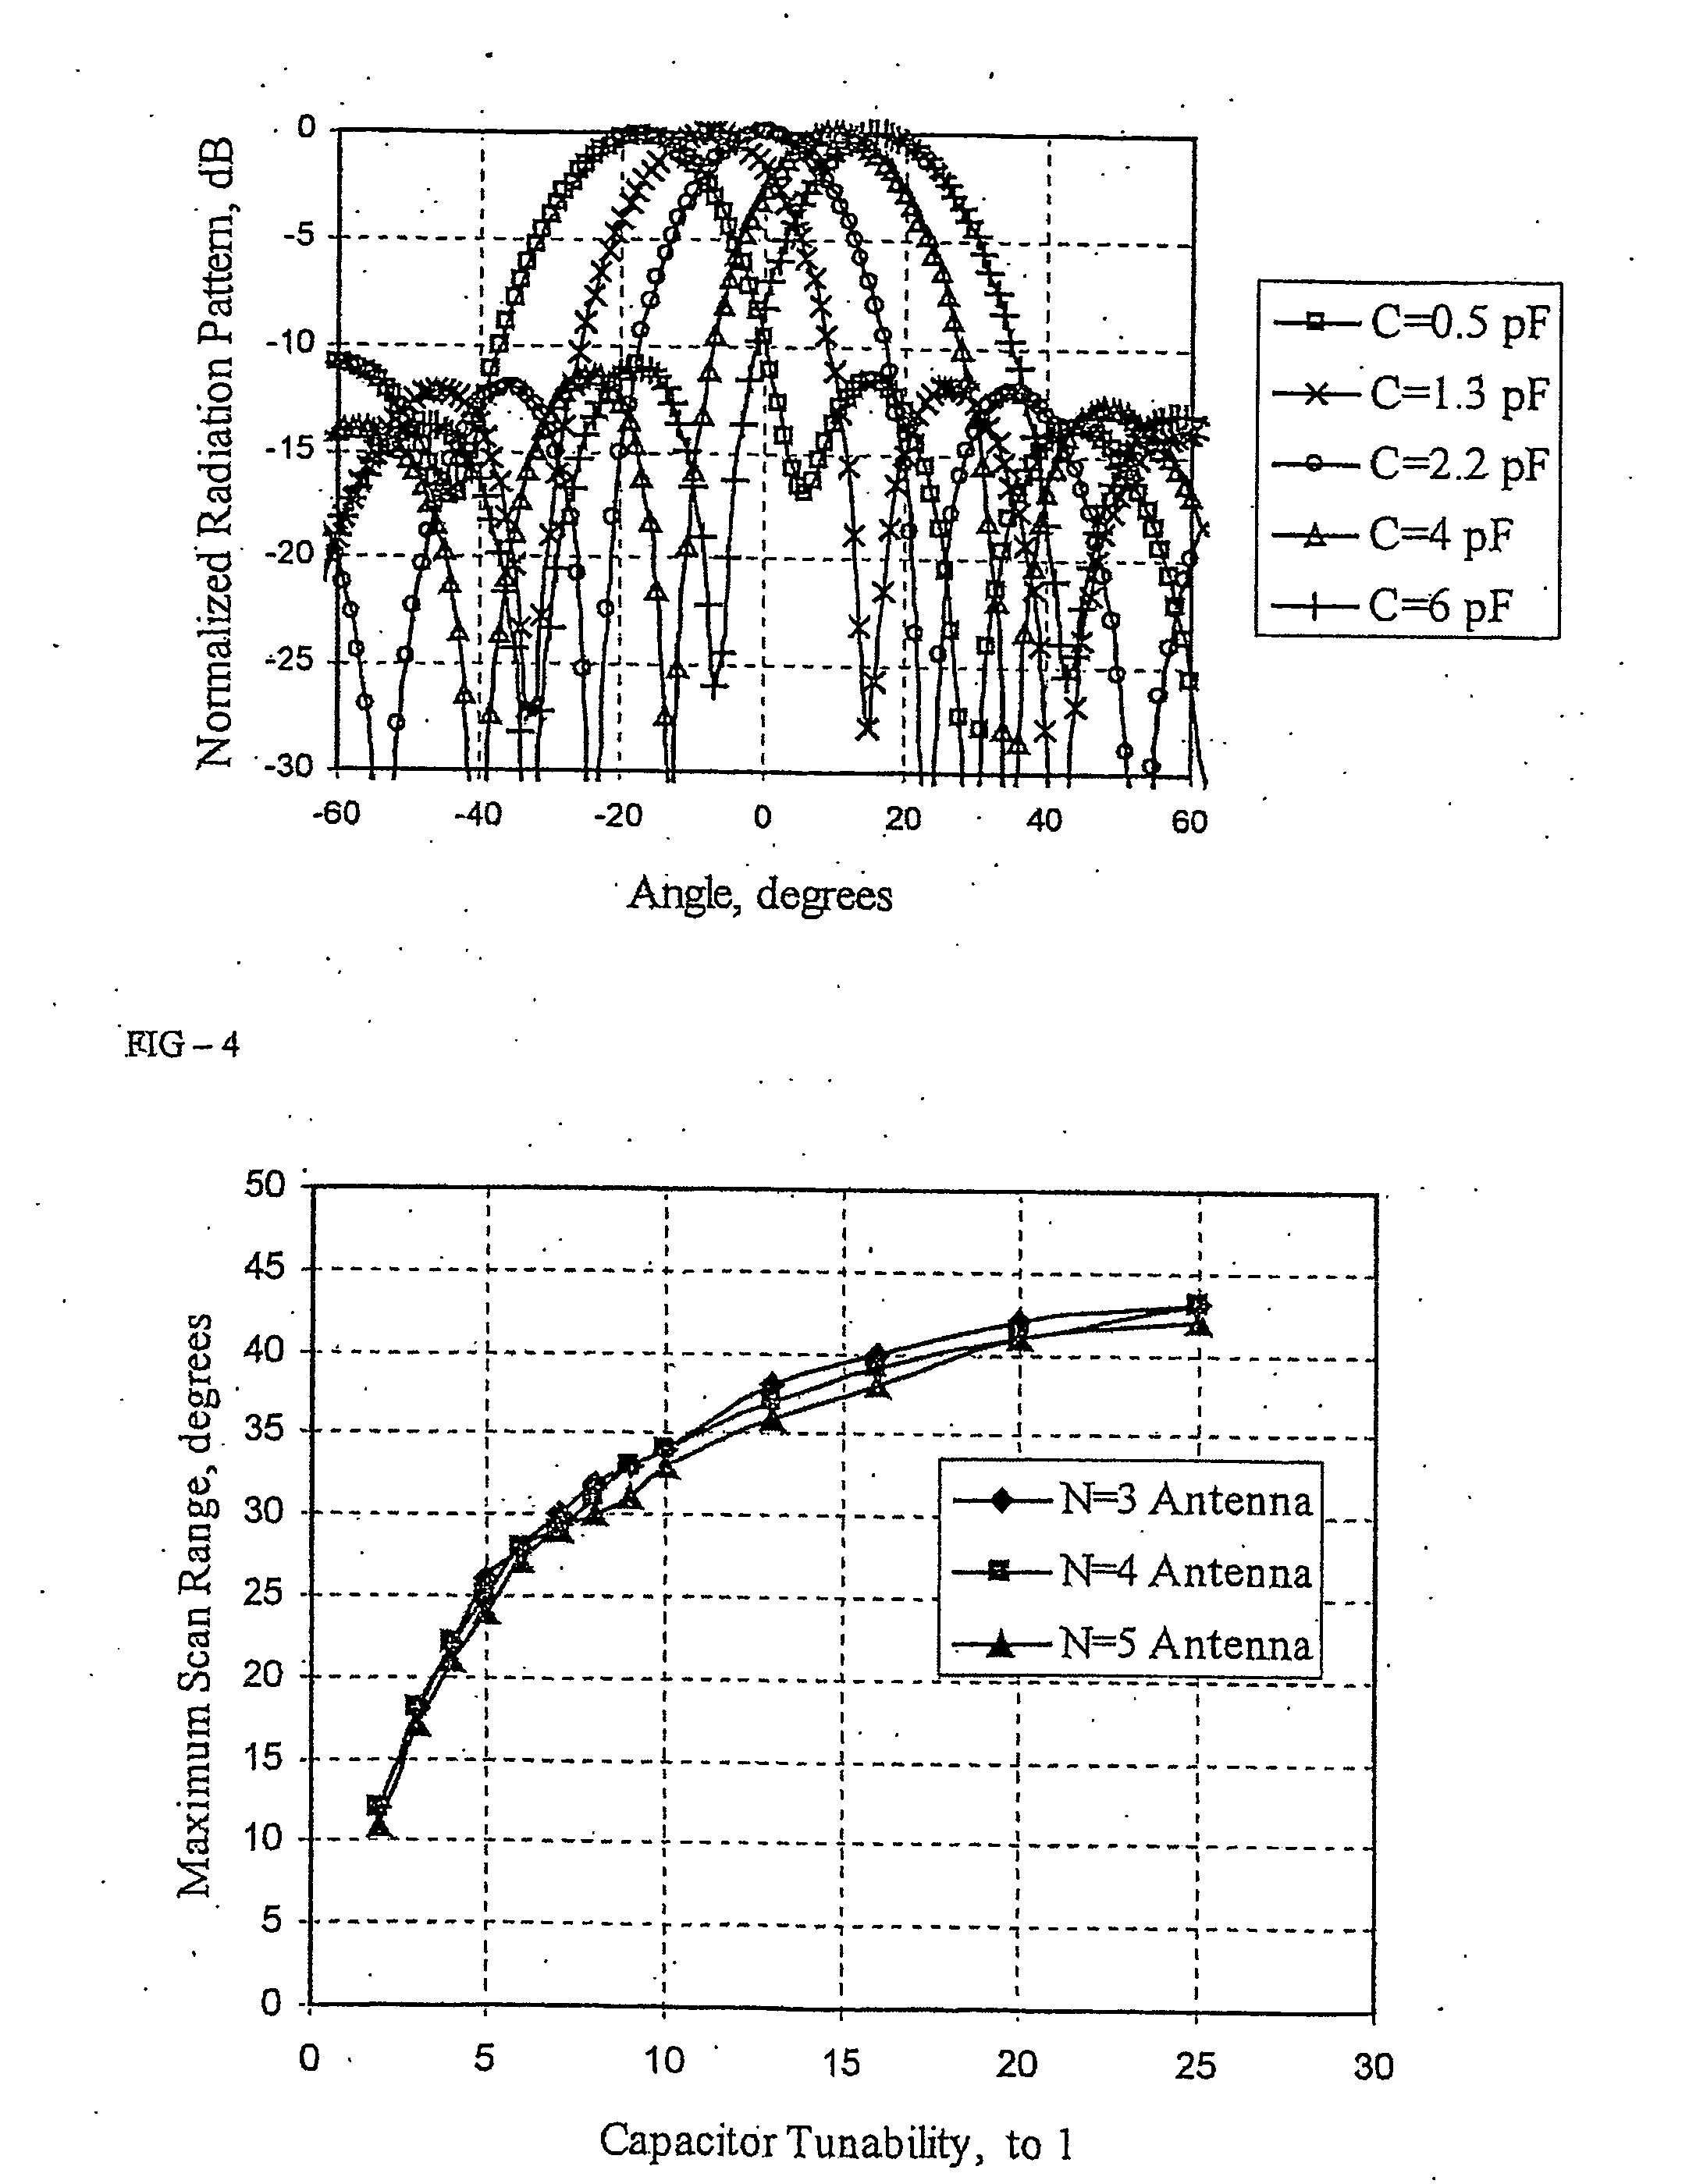 Phased array antenna with extended resonance power divider/phase shifter circuit